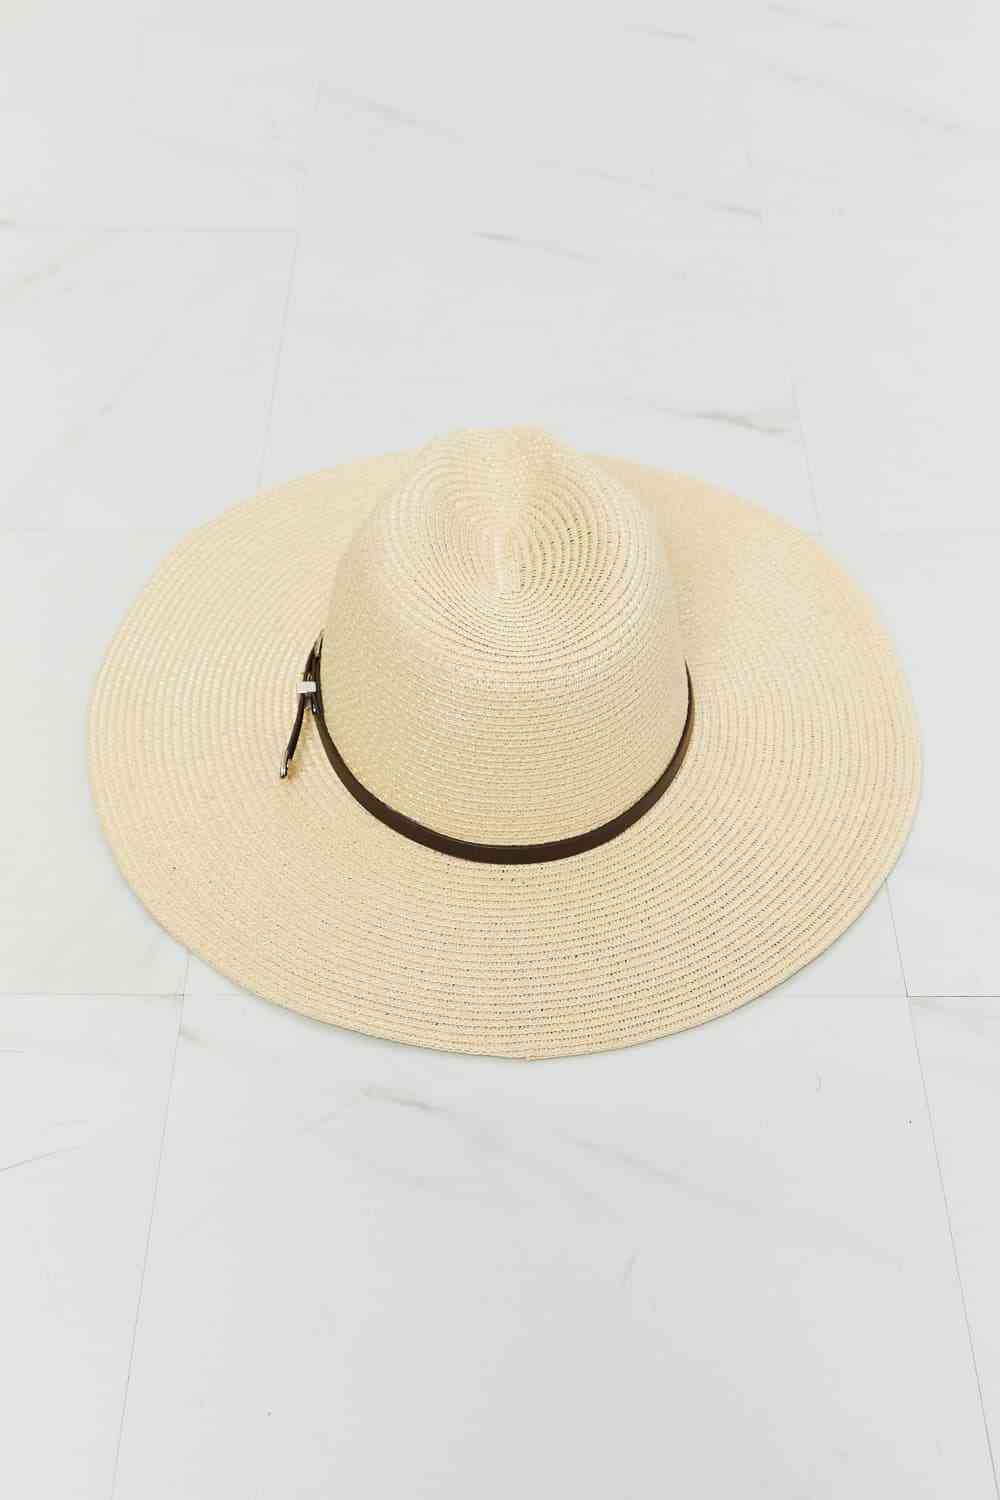 Boho Summer Straw Fedora Hat - Kawaii Stop - Adjustable Straps, Belt Buckle Detailing, Chic and Sophisticated, Comfortable Fit, Fame Accessories, High-Quality Material, Lightweight, Ship from USA, Straw Fedora Hat, Stylish Accessories, Sun-Ready Style, Trendy, Wardrobe Essential